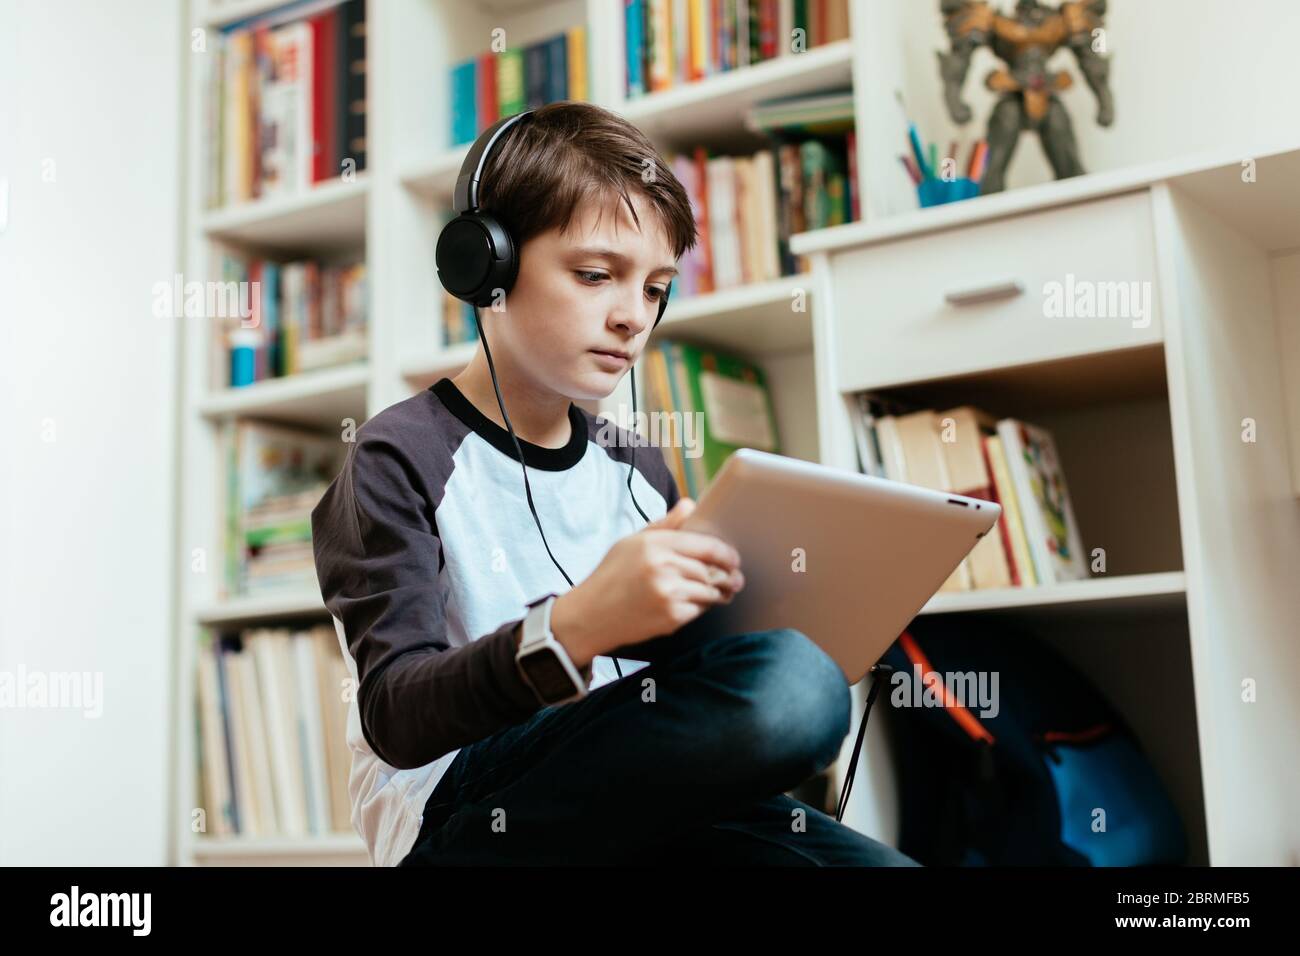 Boy doing his homework on digital tablet at home. Young student working on school assignments on his own. Stock Photo